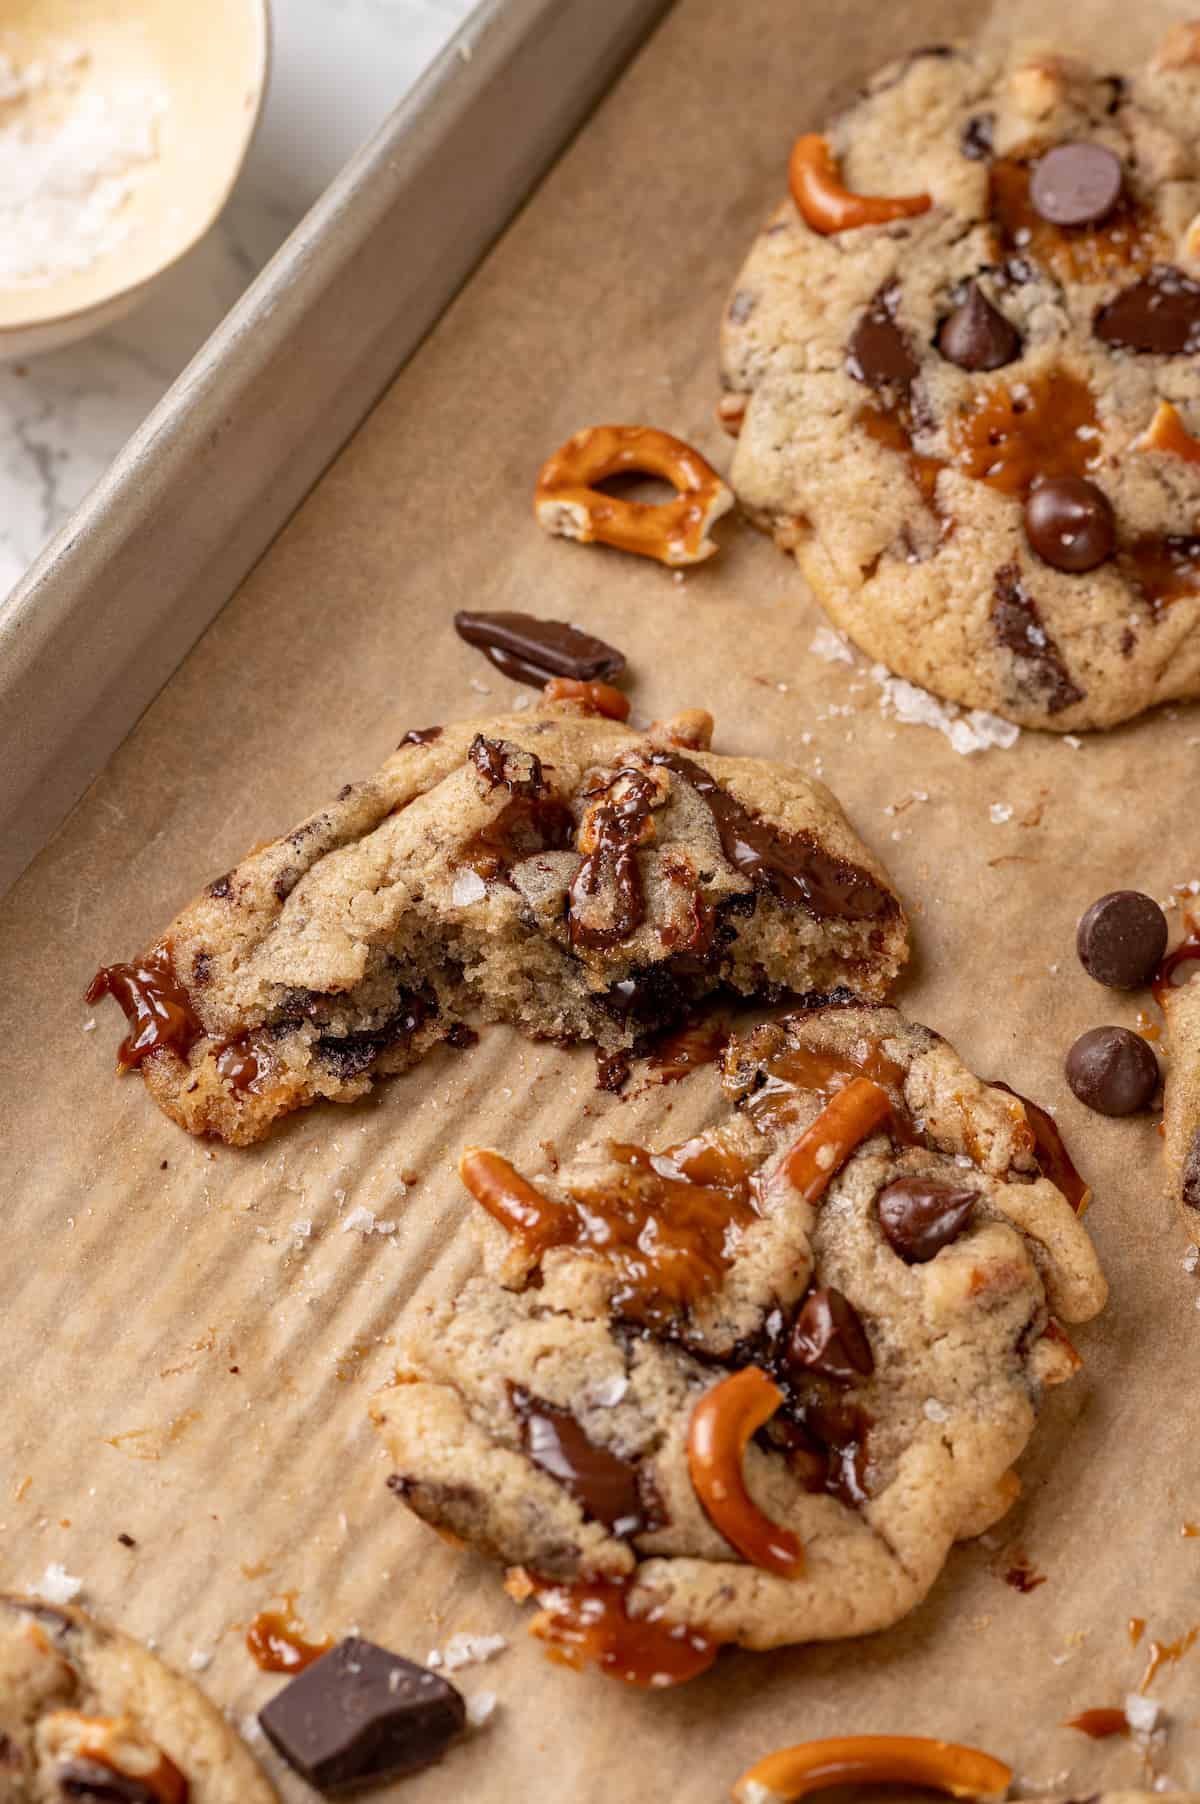 Kitchen sink cookies on parchment-lined baking sheet with one cookie broke in half